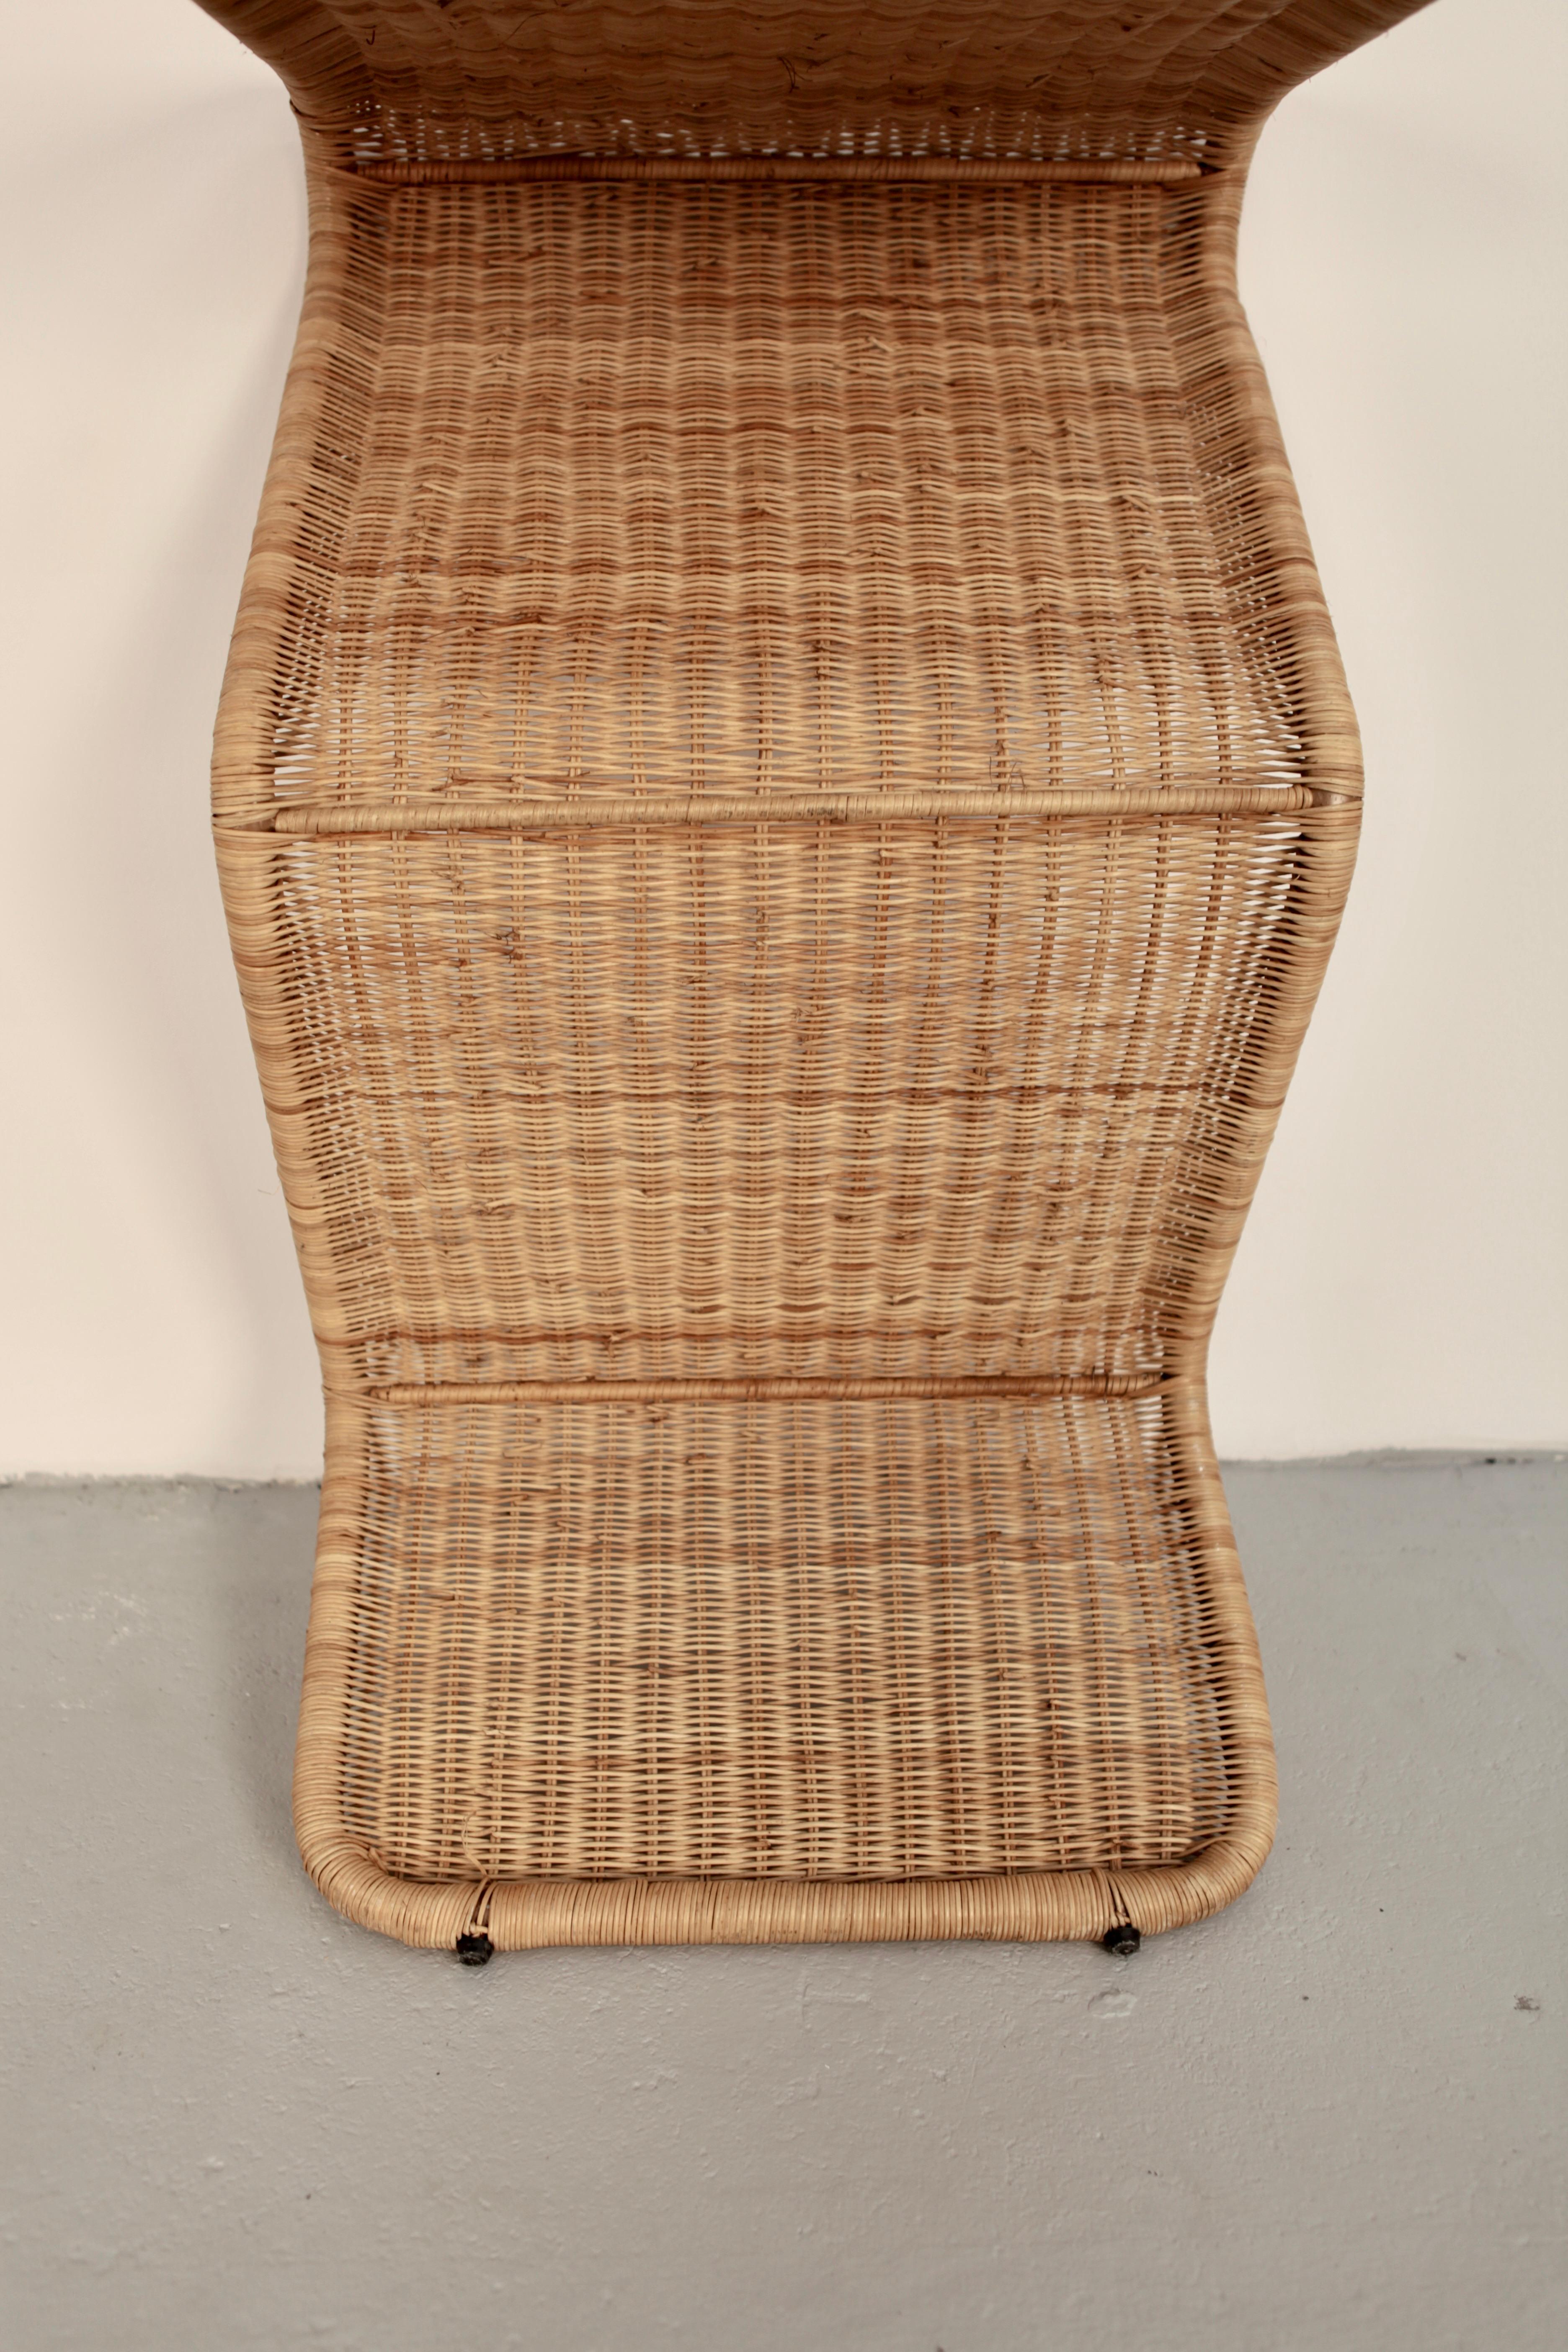 Woven Cane Easy Chair, Model P3, Italy, 1960s 5